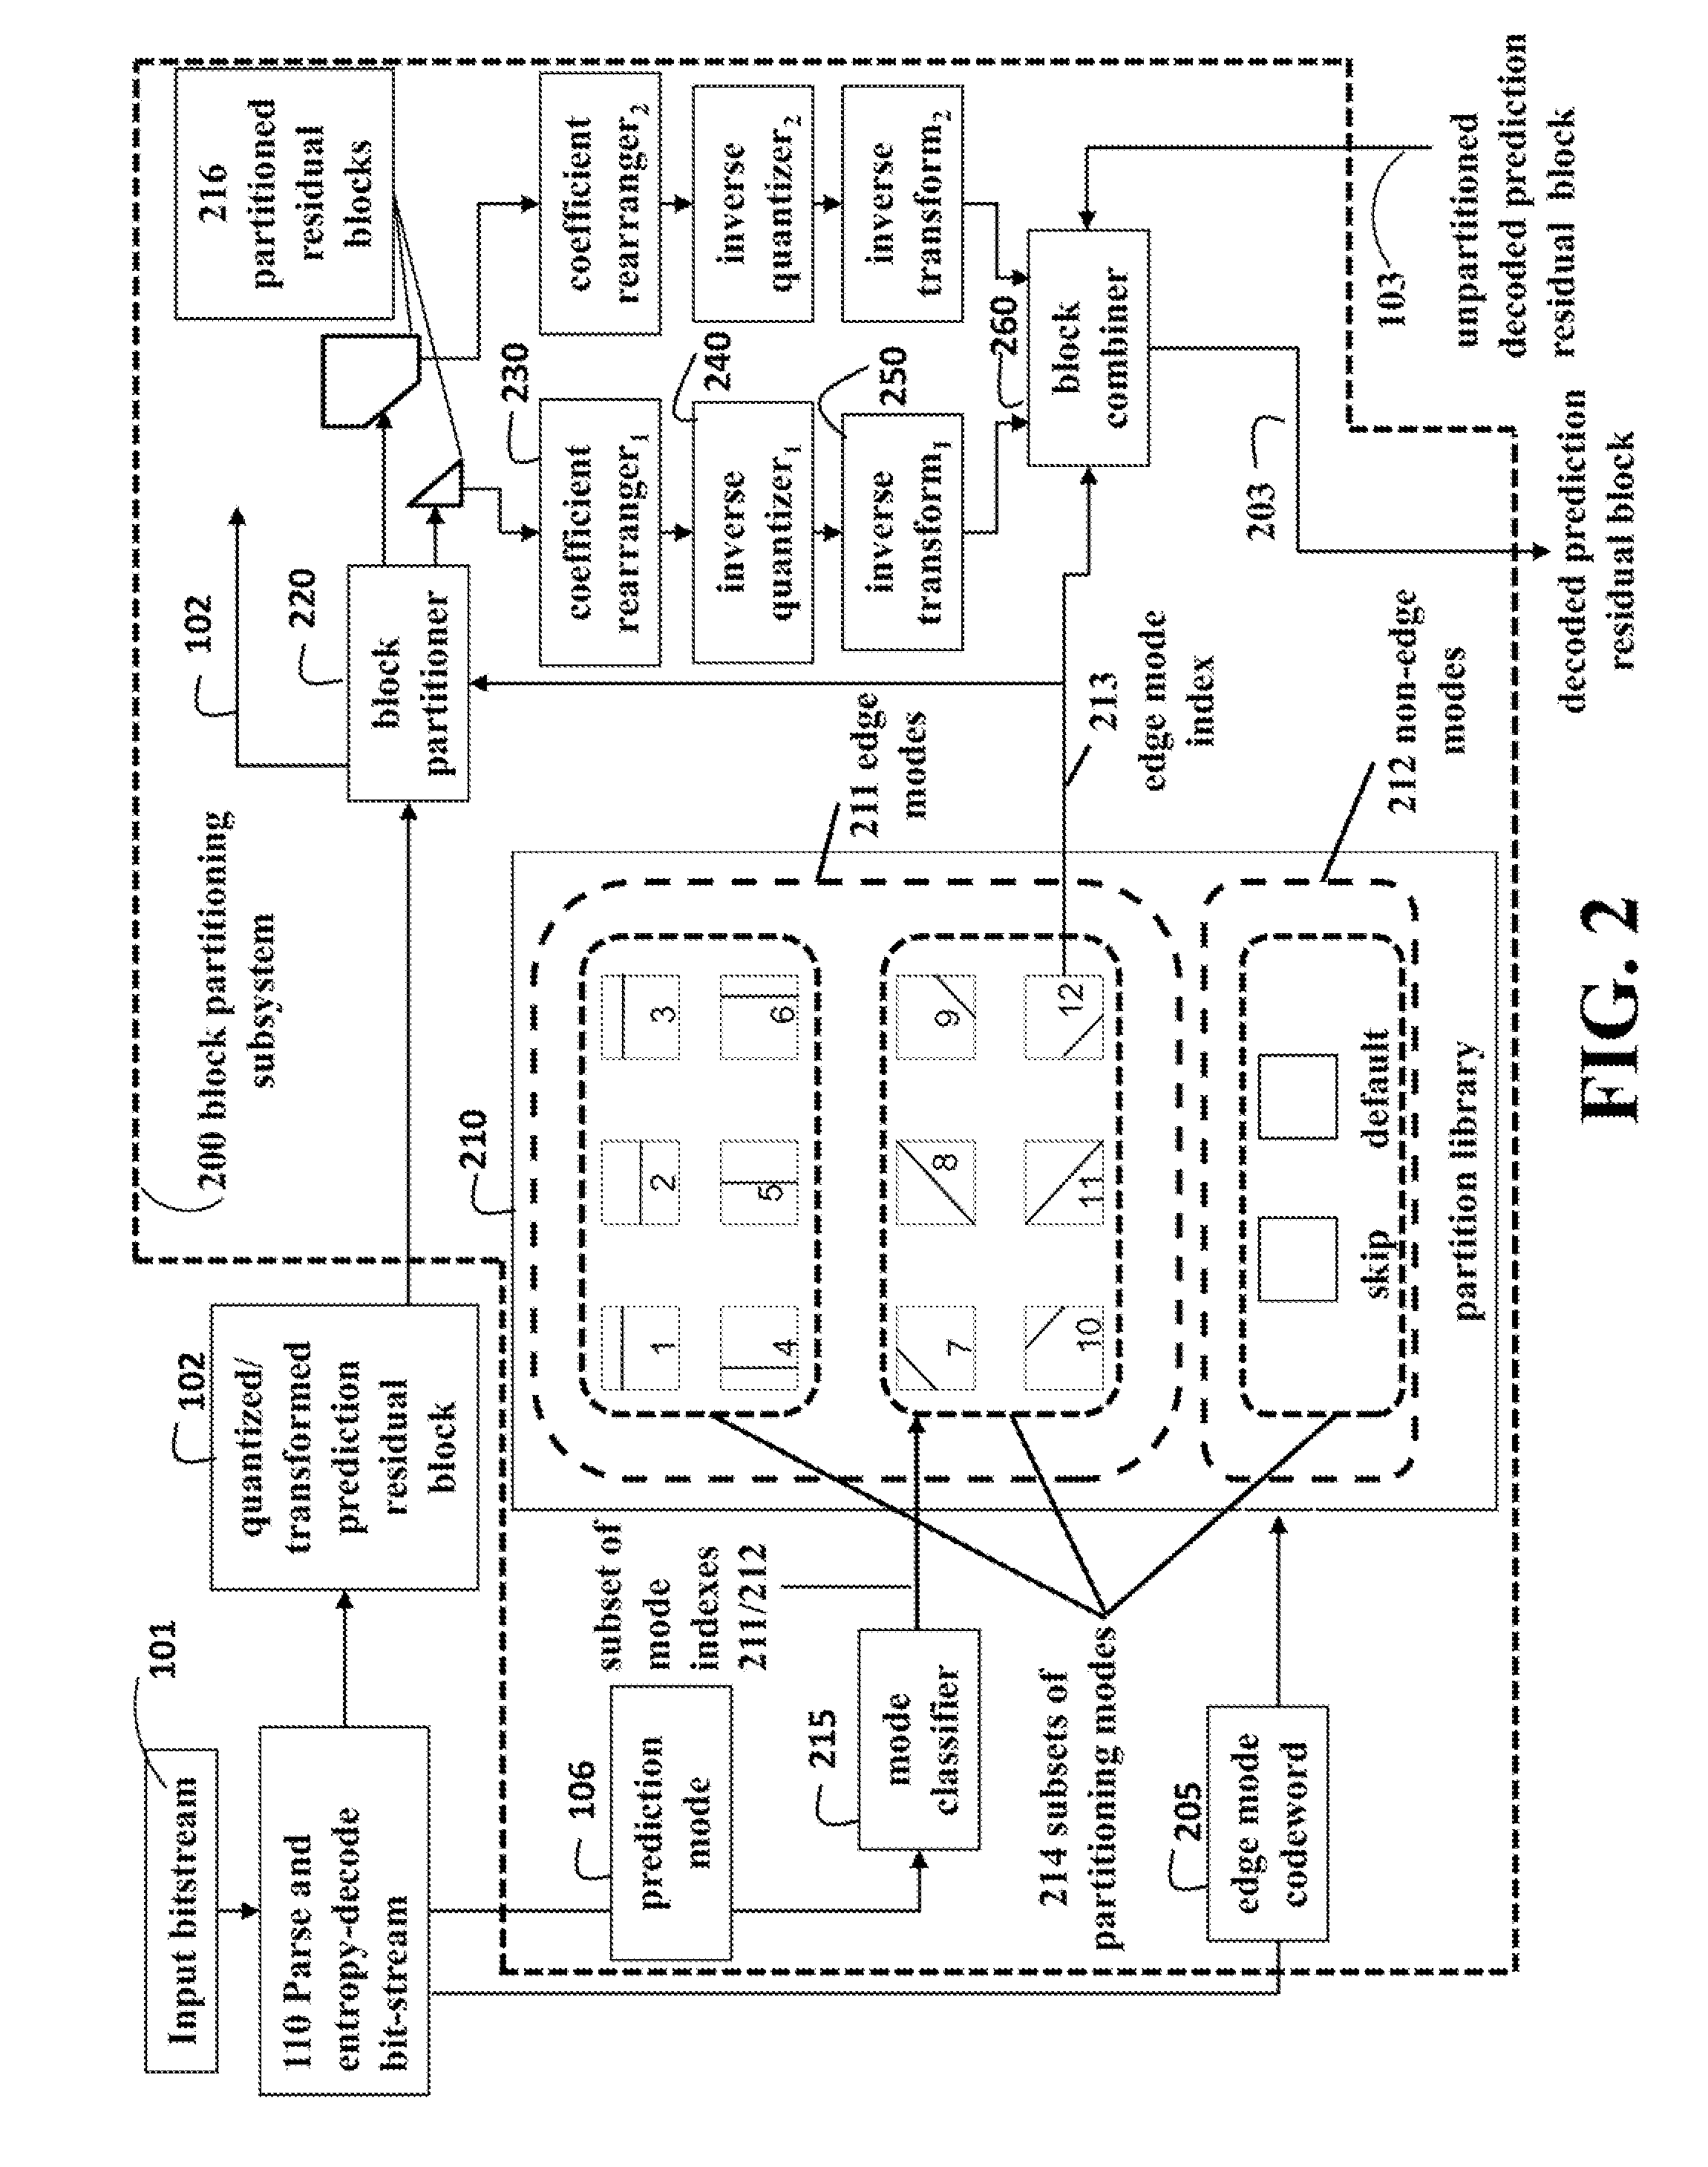 Method for Video Coding Using Blocks Partitioned According to Edge Orientations